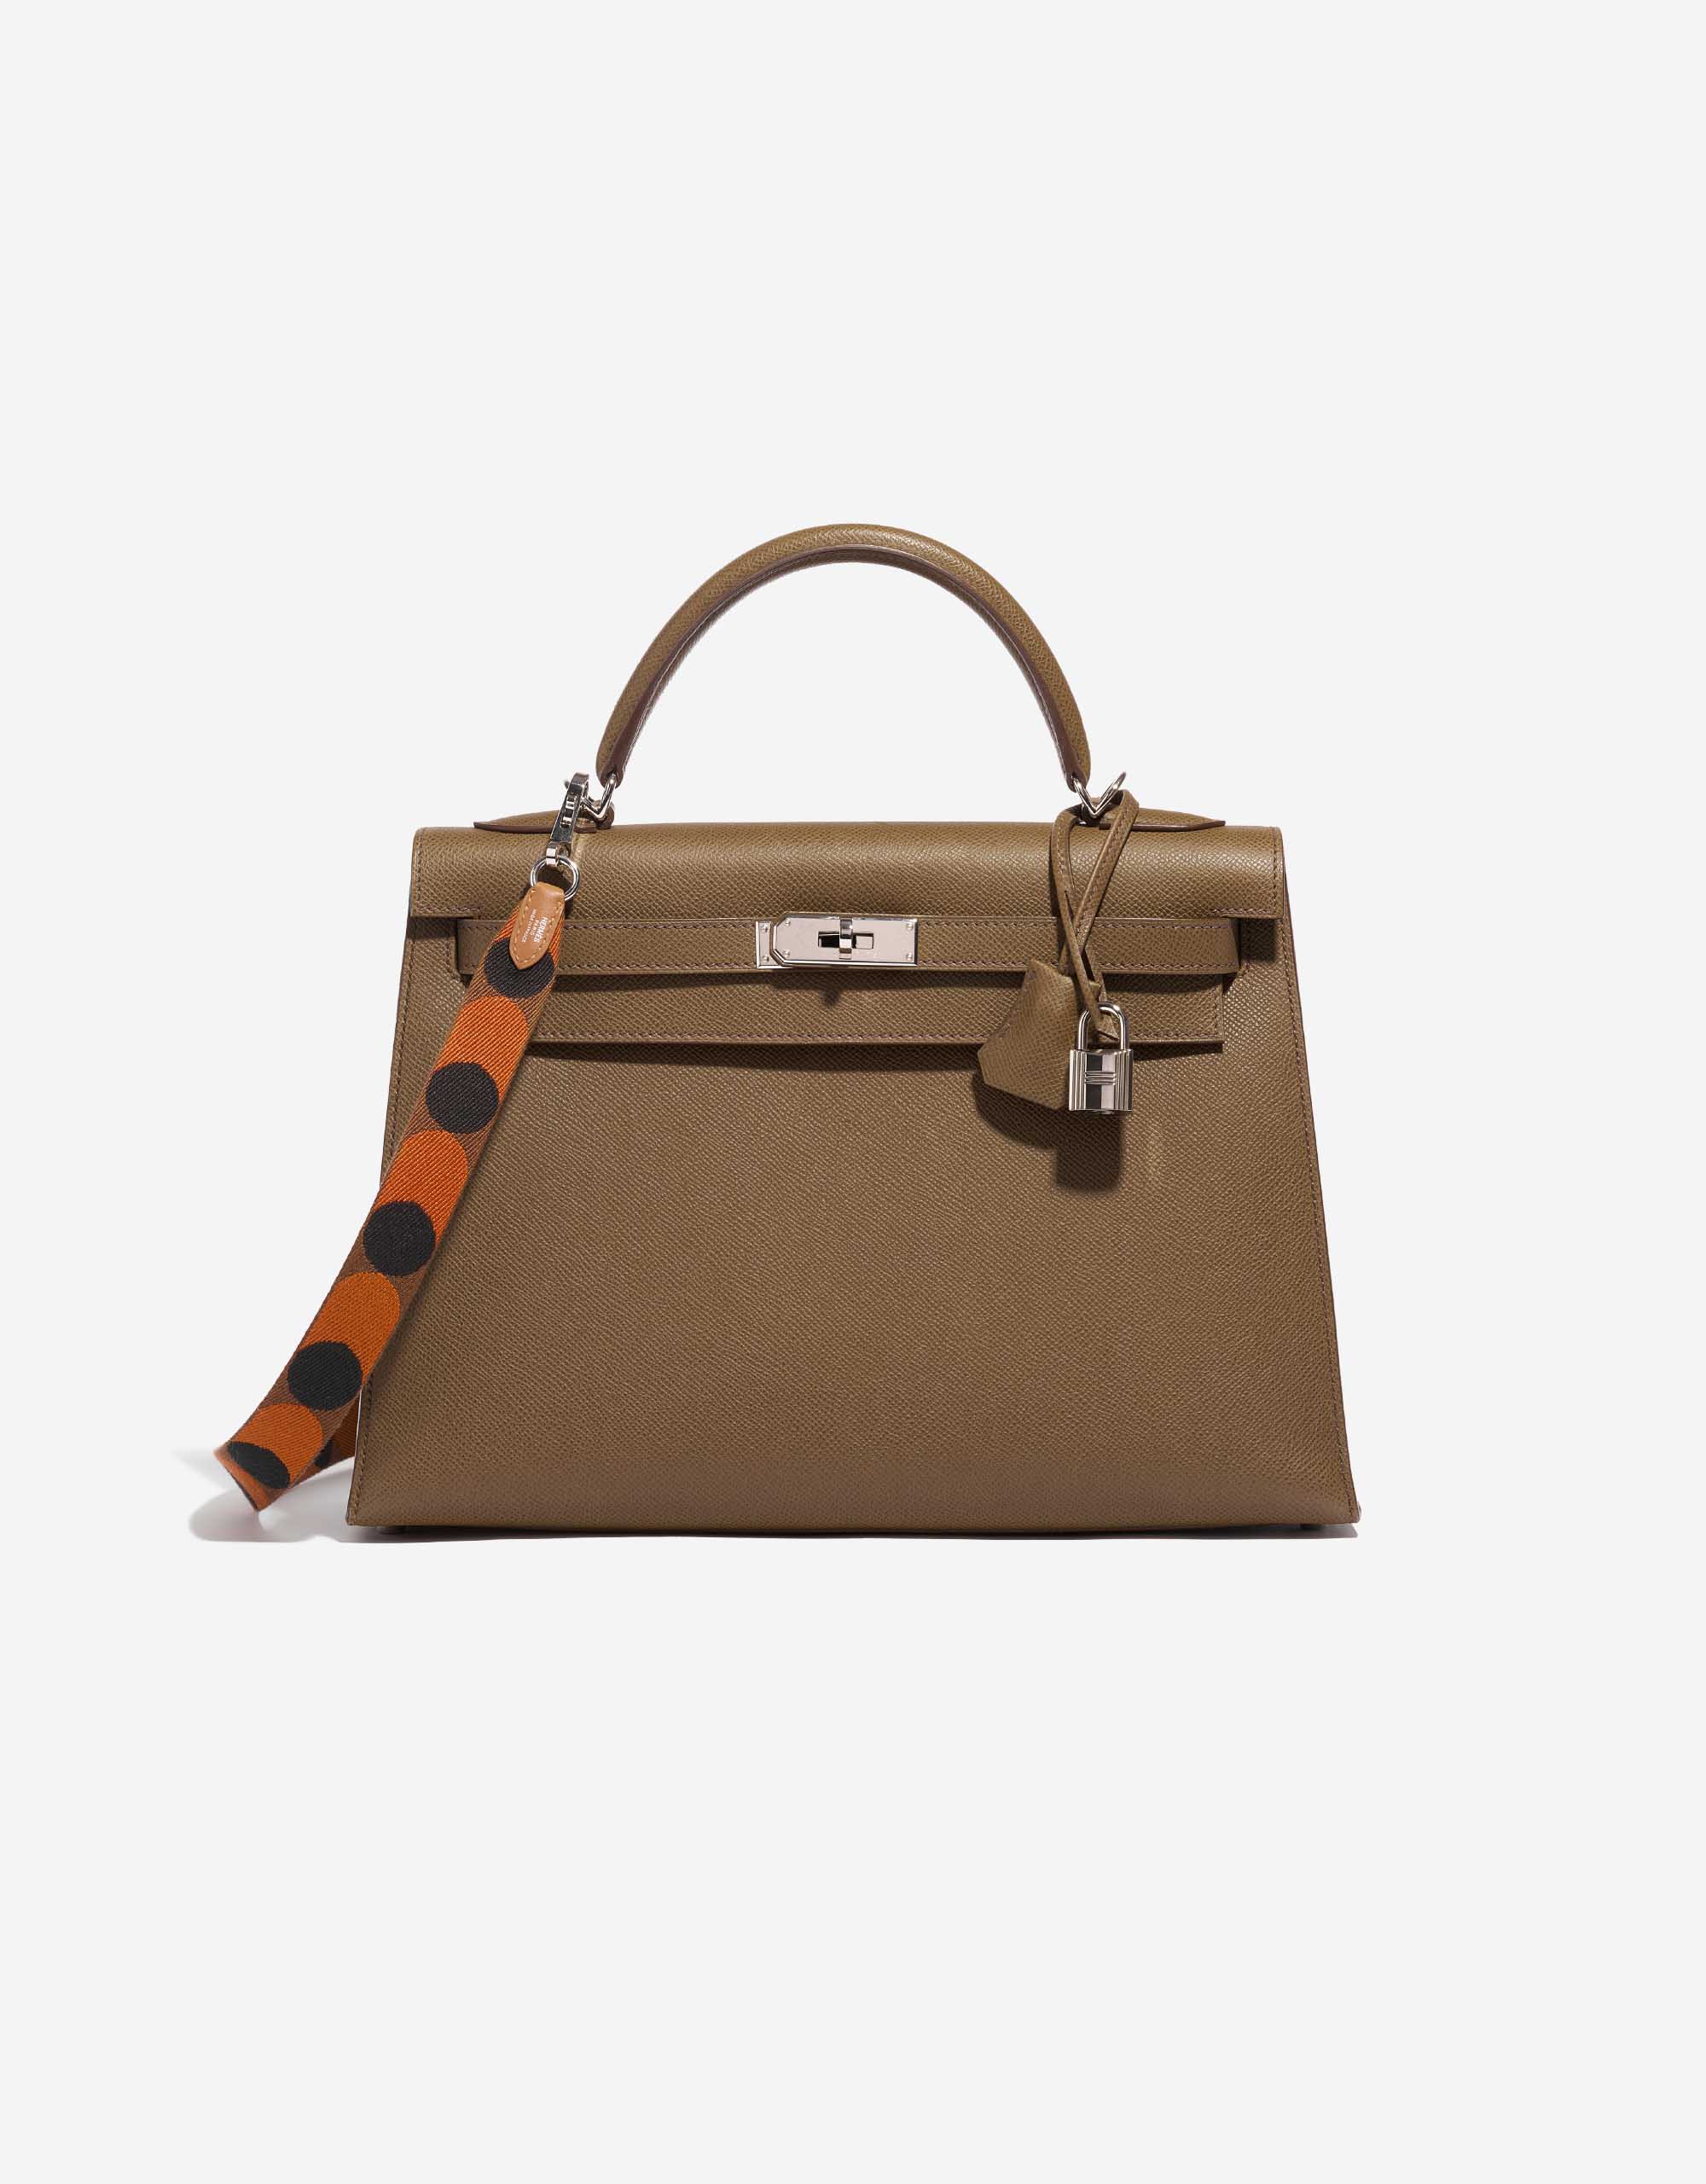 Saclab-Official on X: Hermès Kelly Pochette Lizard- making every outfit  classier since 2006. #Saclab #Hermes #KellyPochette #ChicToBeGreen  #PreownedLuxury  / X